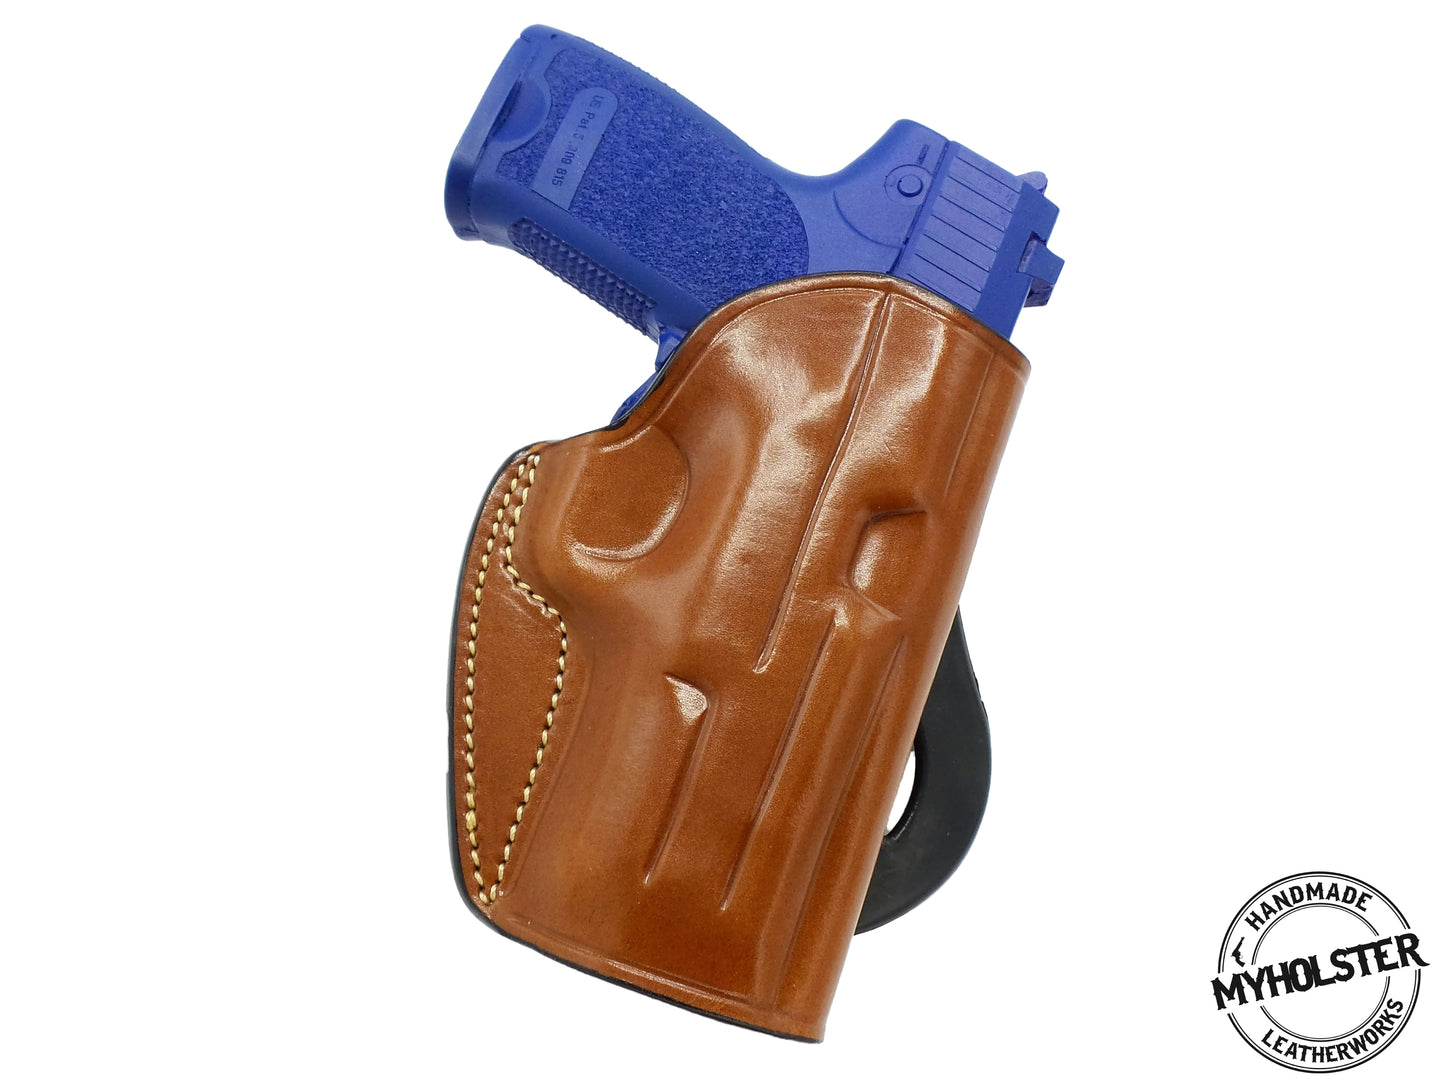 Smith & Wesson 5906 OWB Leather Quick Draw Right Hand Paddle Holster - Choose Your Color